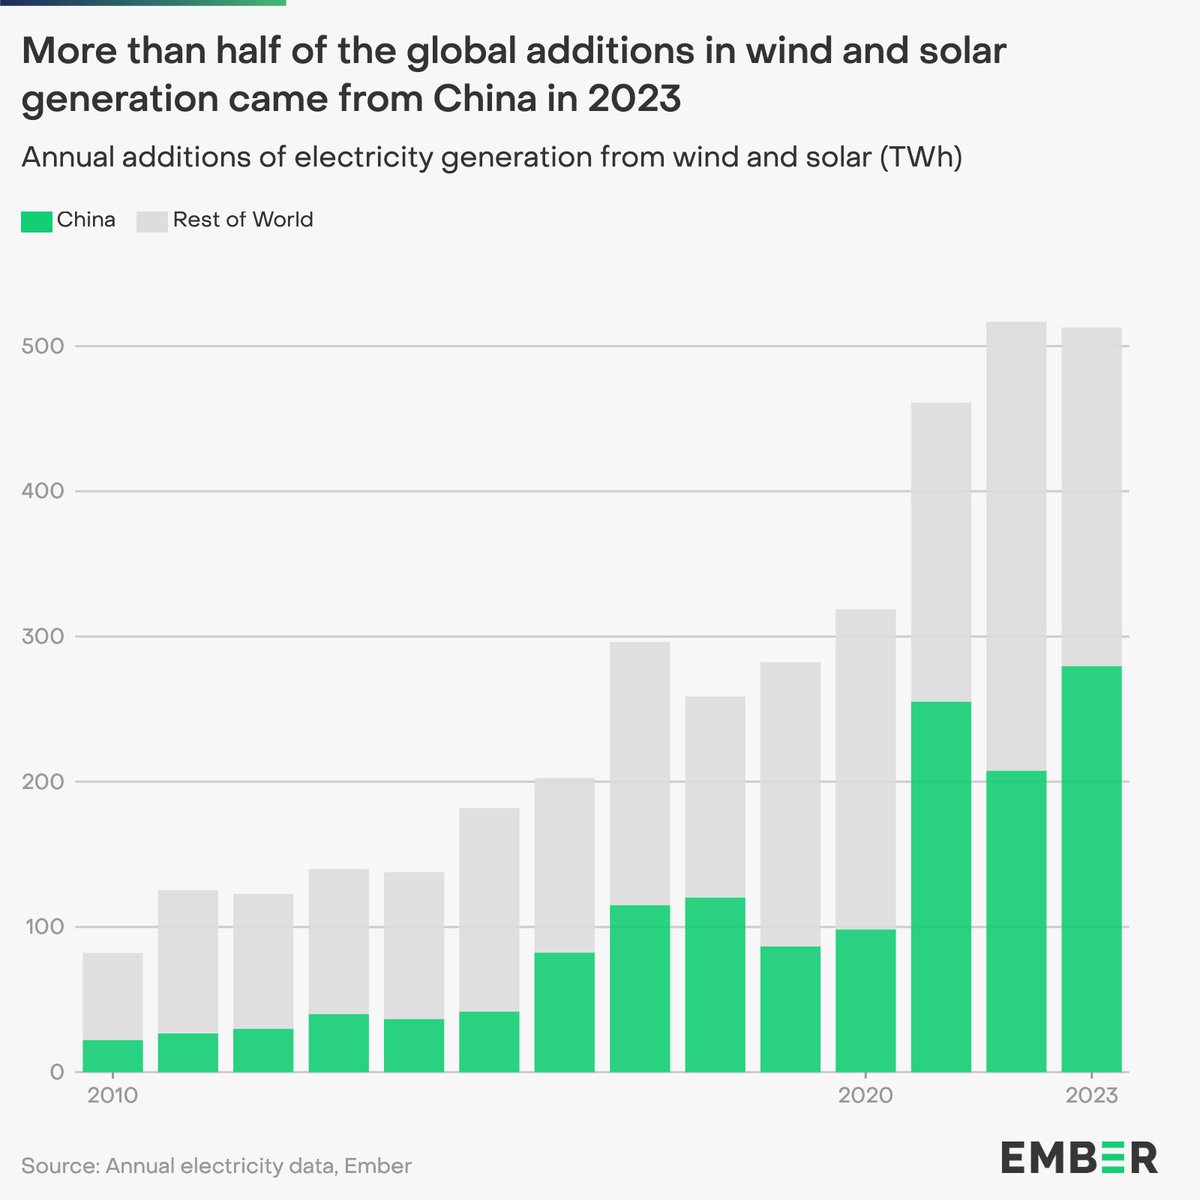 In 2023, over half of global additions in wind and solar generation came from China. Targeted policy support, strong industrial capacity and market and regulatory incentives led to 🇨🇳 becoming a global leader in 🌪️ and ☀️ deployment. More in #GER24: ember-climate.org/insights/resea…